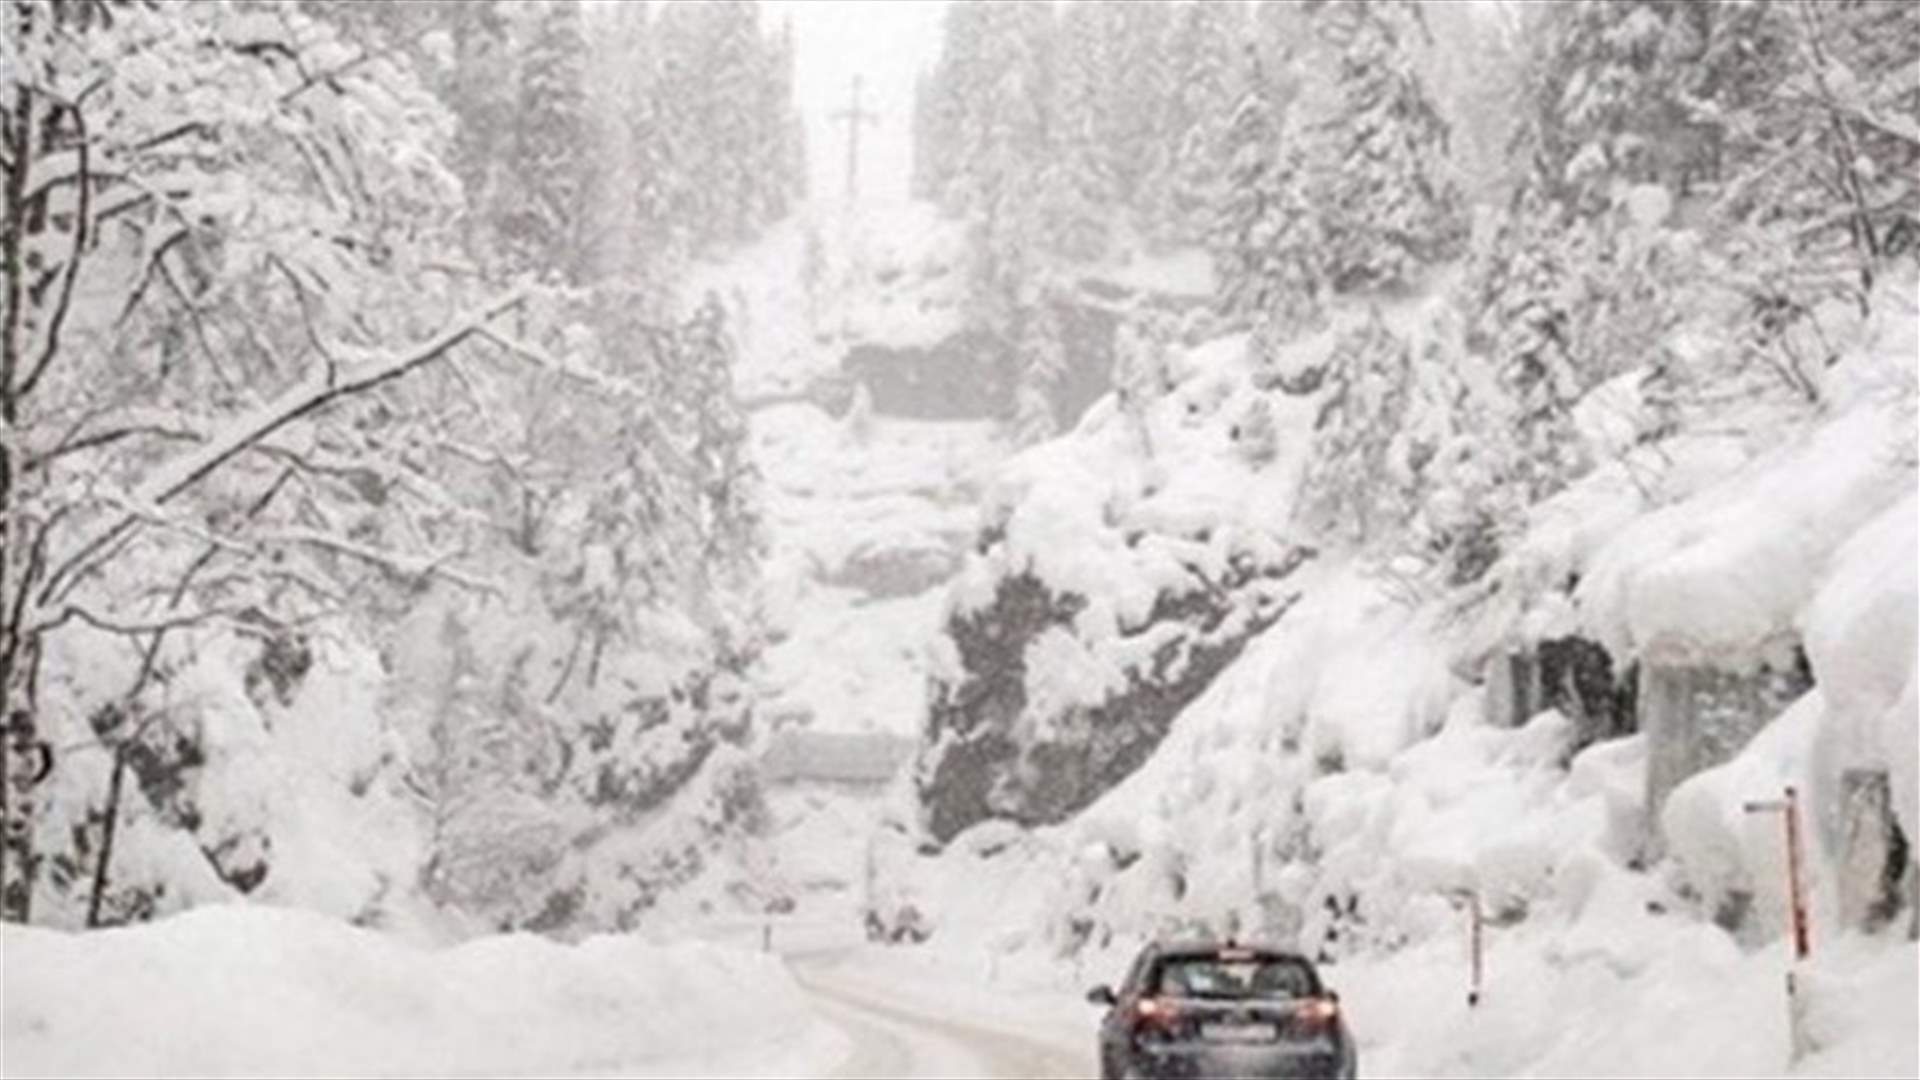 Is Lebanon prepared for upcoming snowy months&#63;